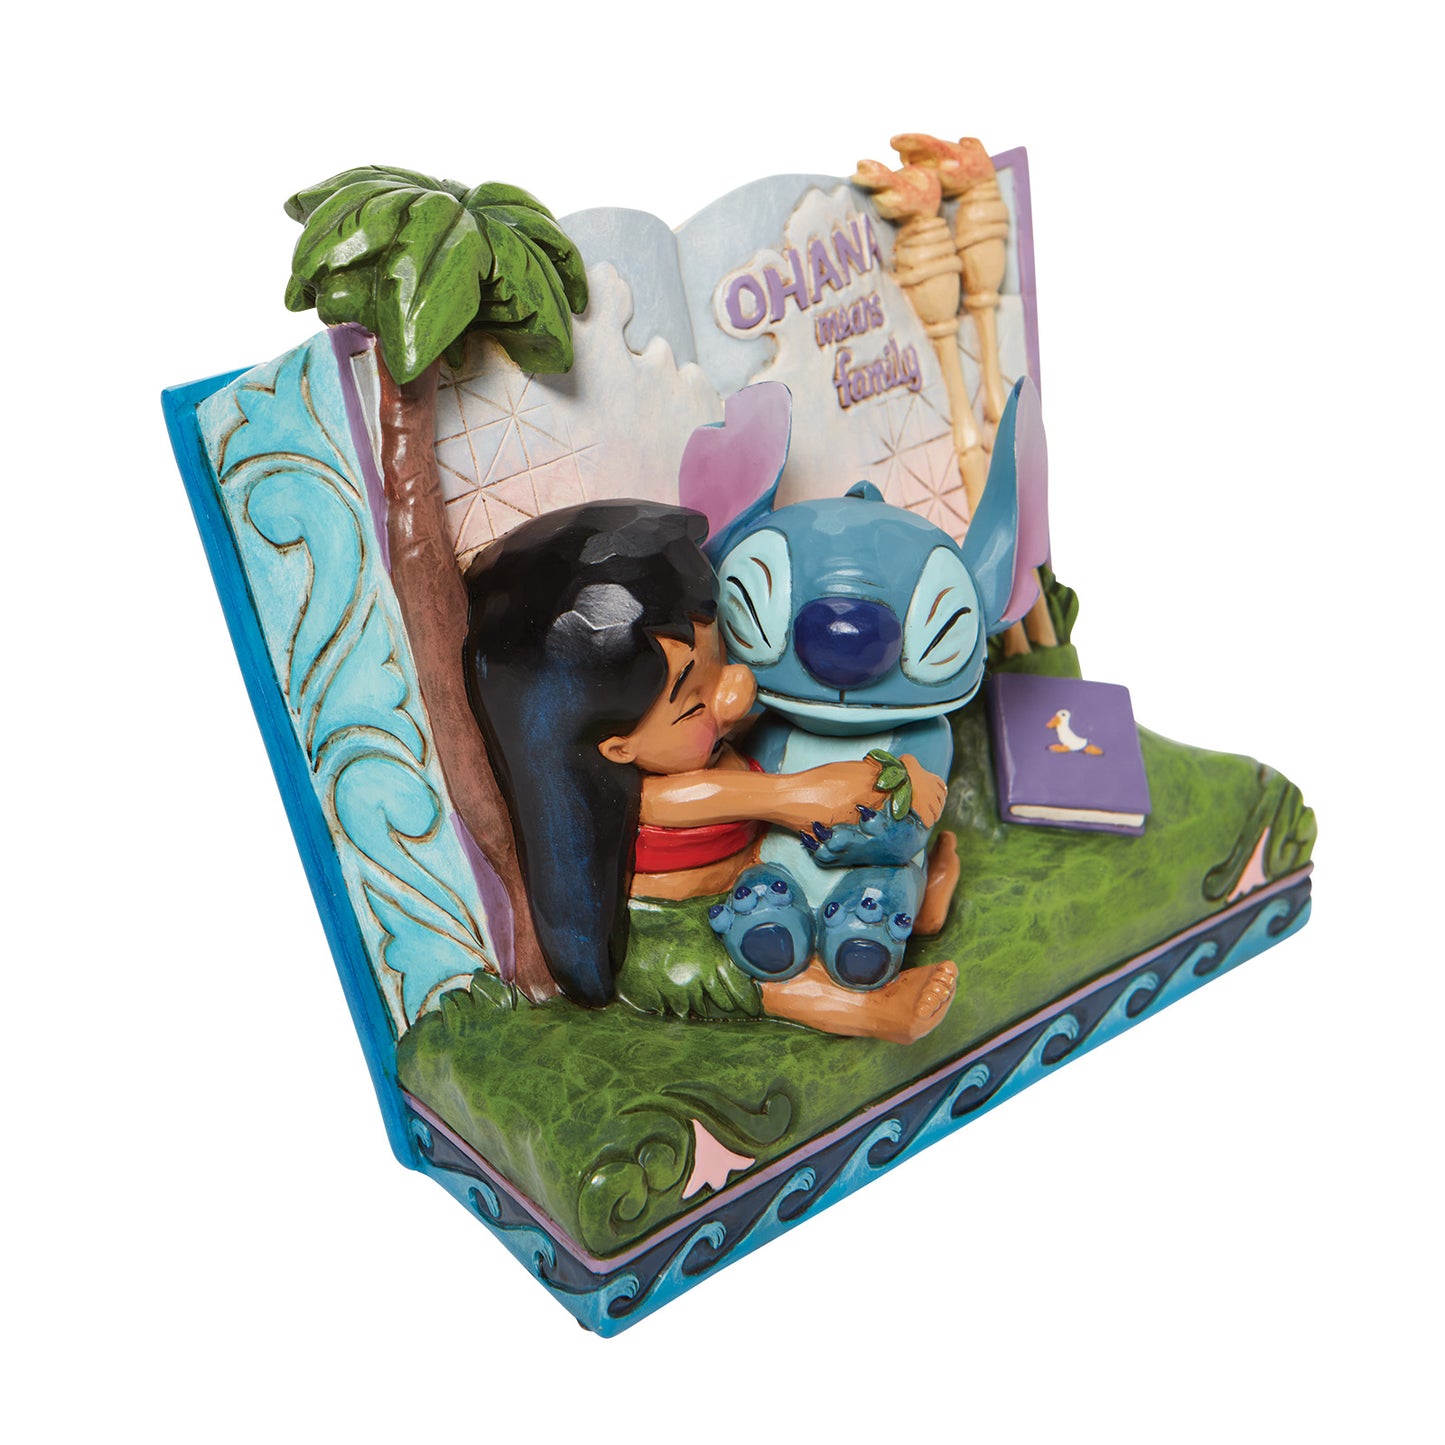 Disney Traditions Ohana Means Family Storybook Figurine